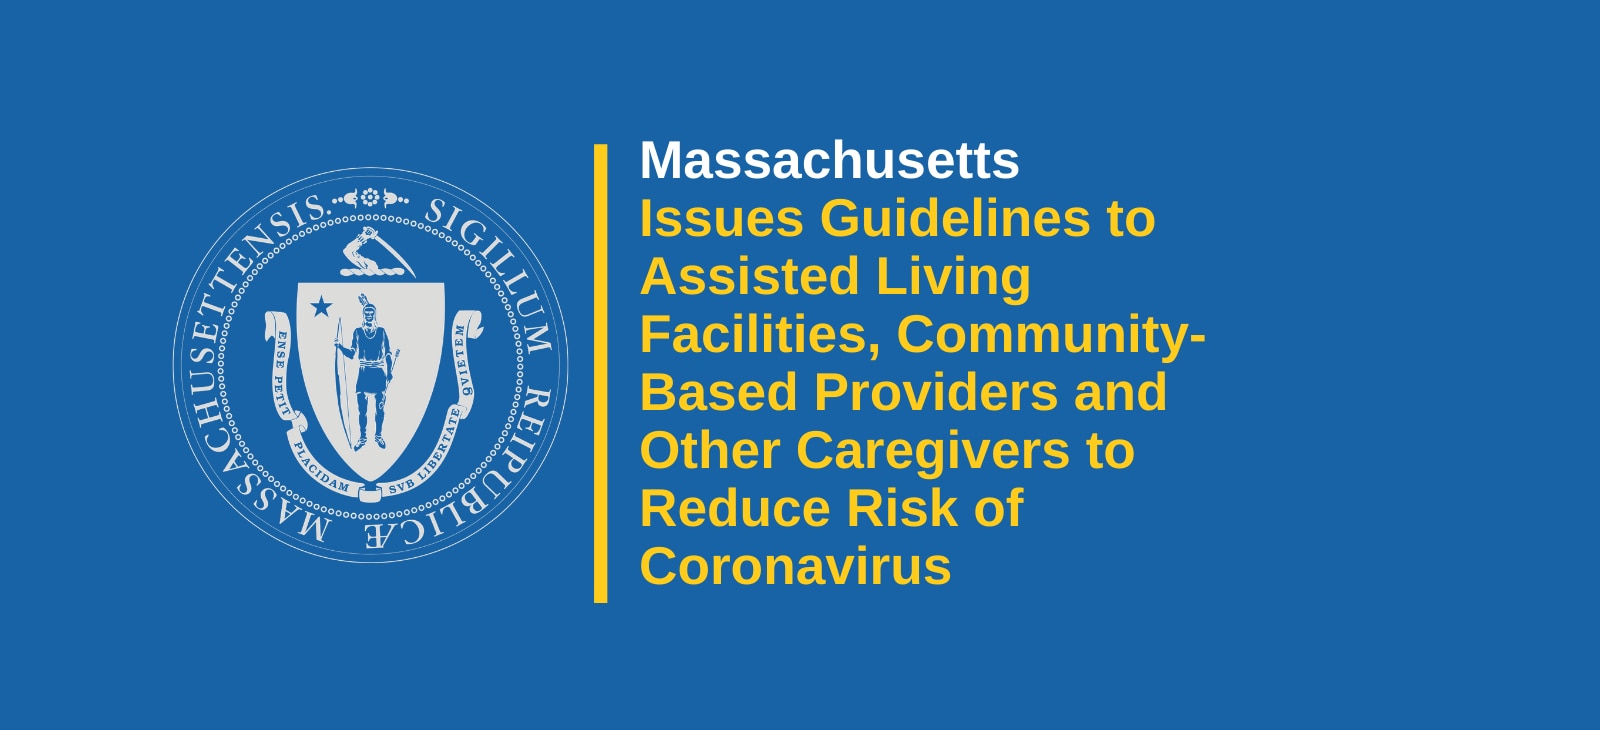 Massachusetts Issues Guidelines to Assisted Living Facilities, Community-Based Providers and Other Caregivers to Reduce Risk of Coronavirus